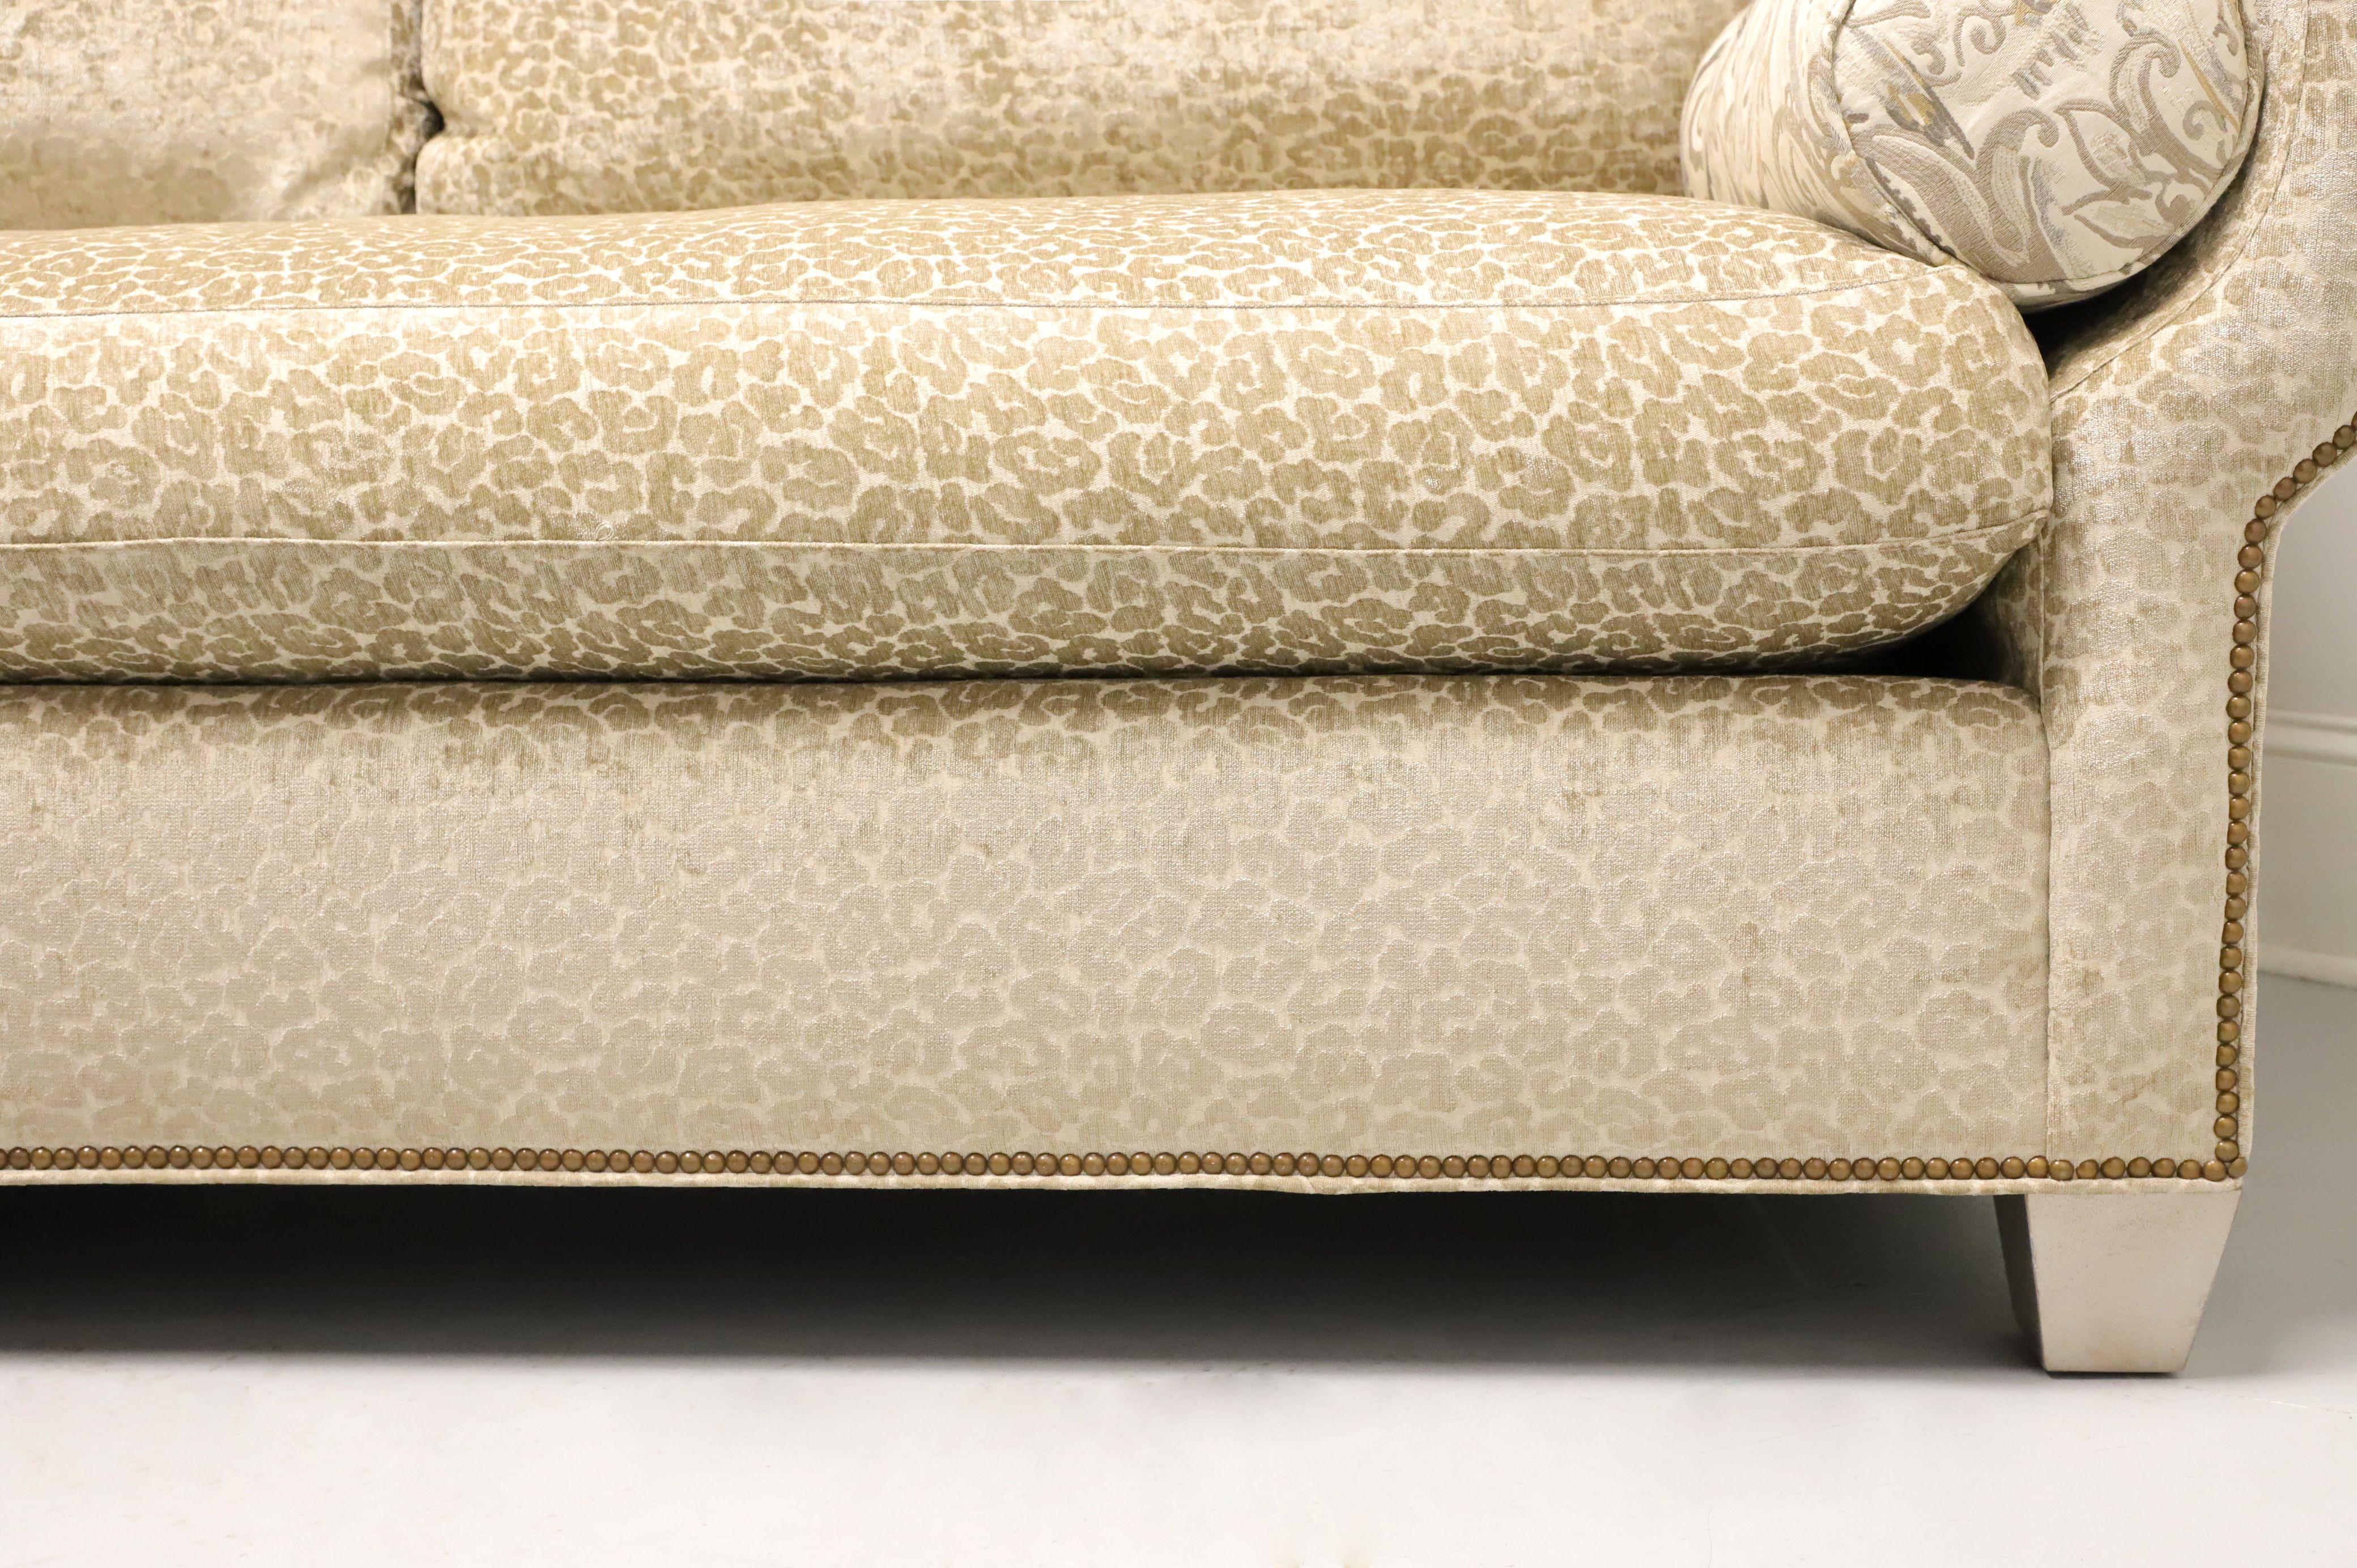 HICKORY WHITE Transitional Leopard Print Sofa with Nailhead Trim For Sale 9